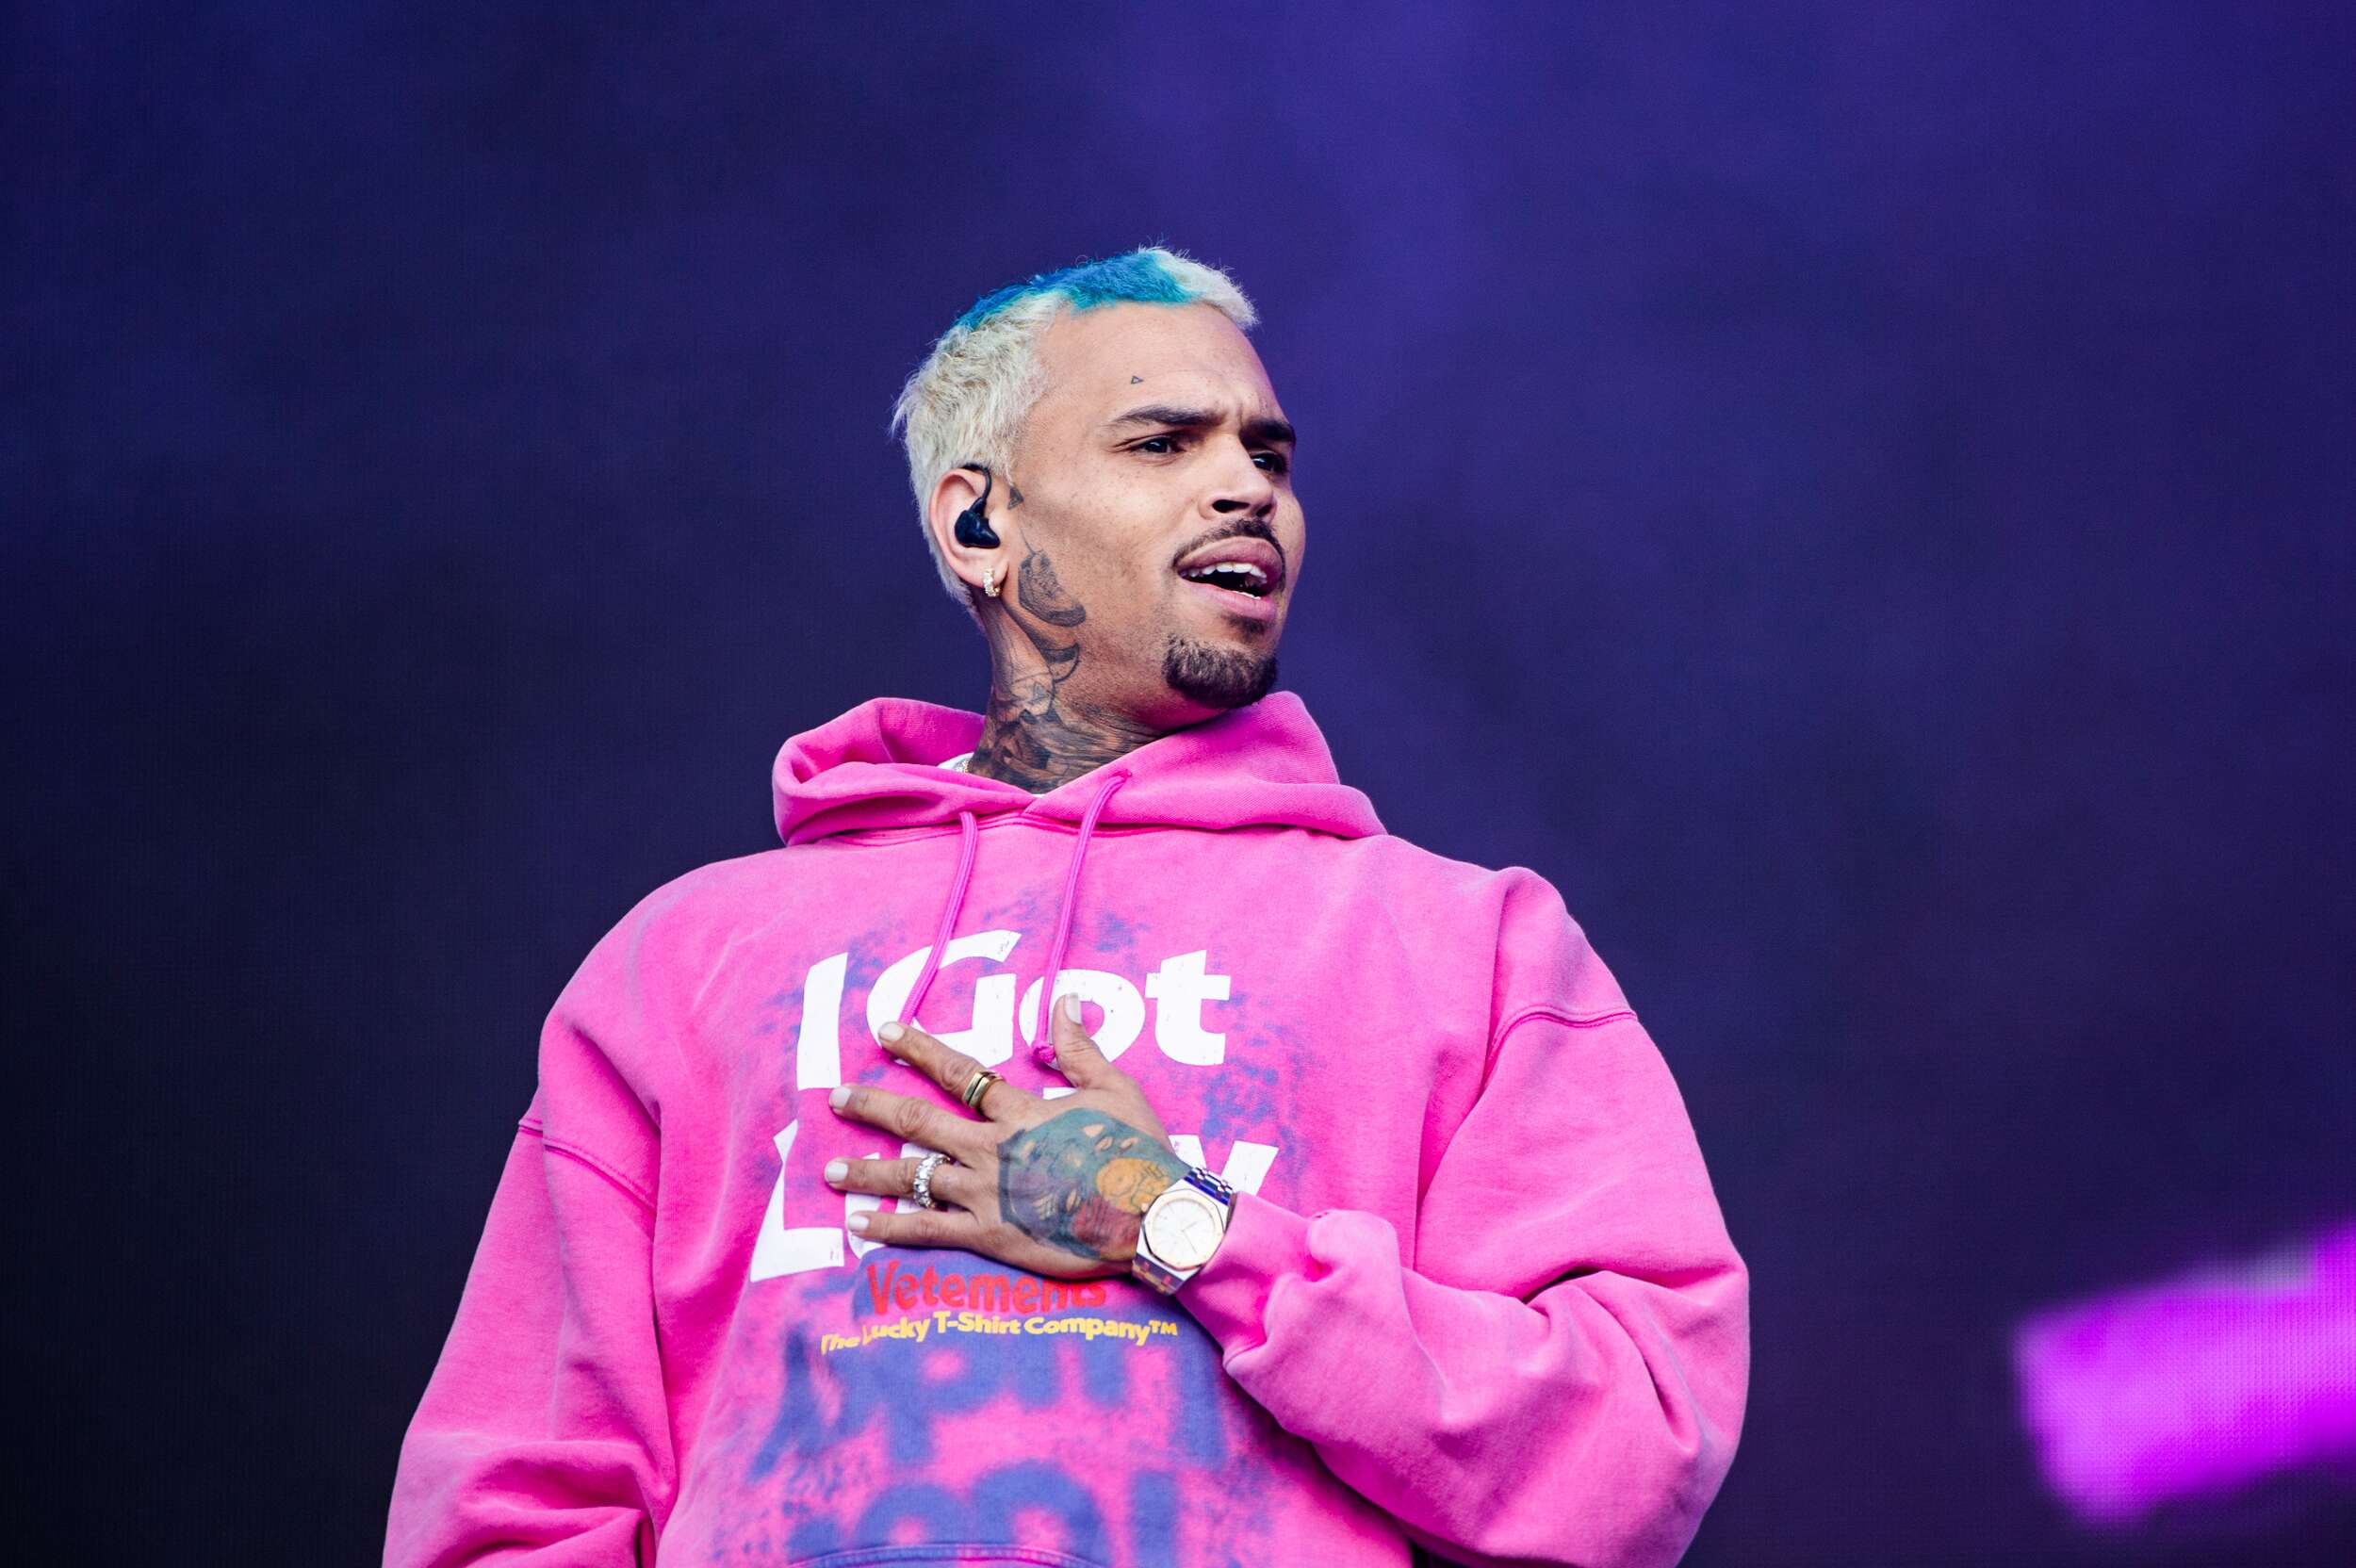 Chris Brown Throws A Party With Music By Steve Wonder To Honor His Daughter's First Birthday